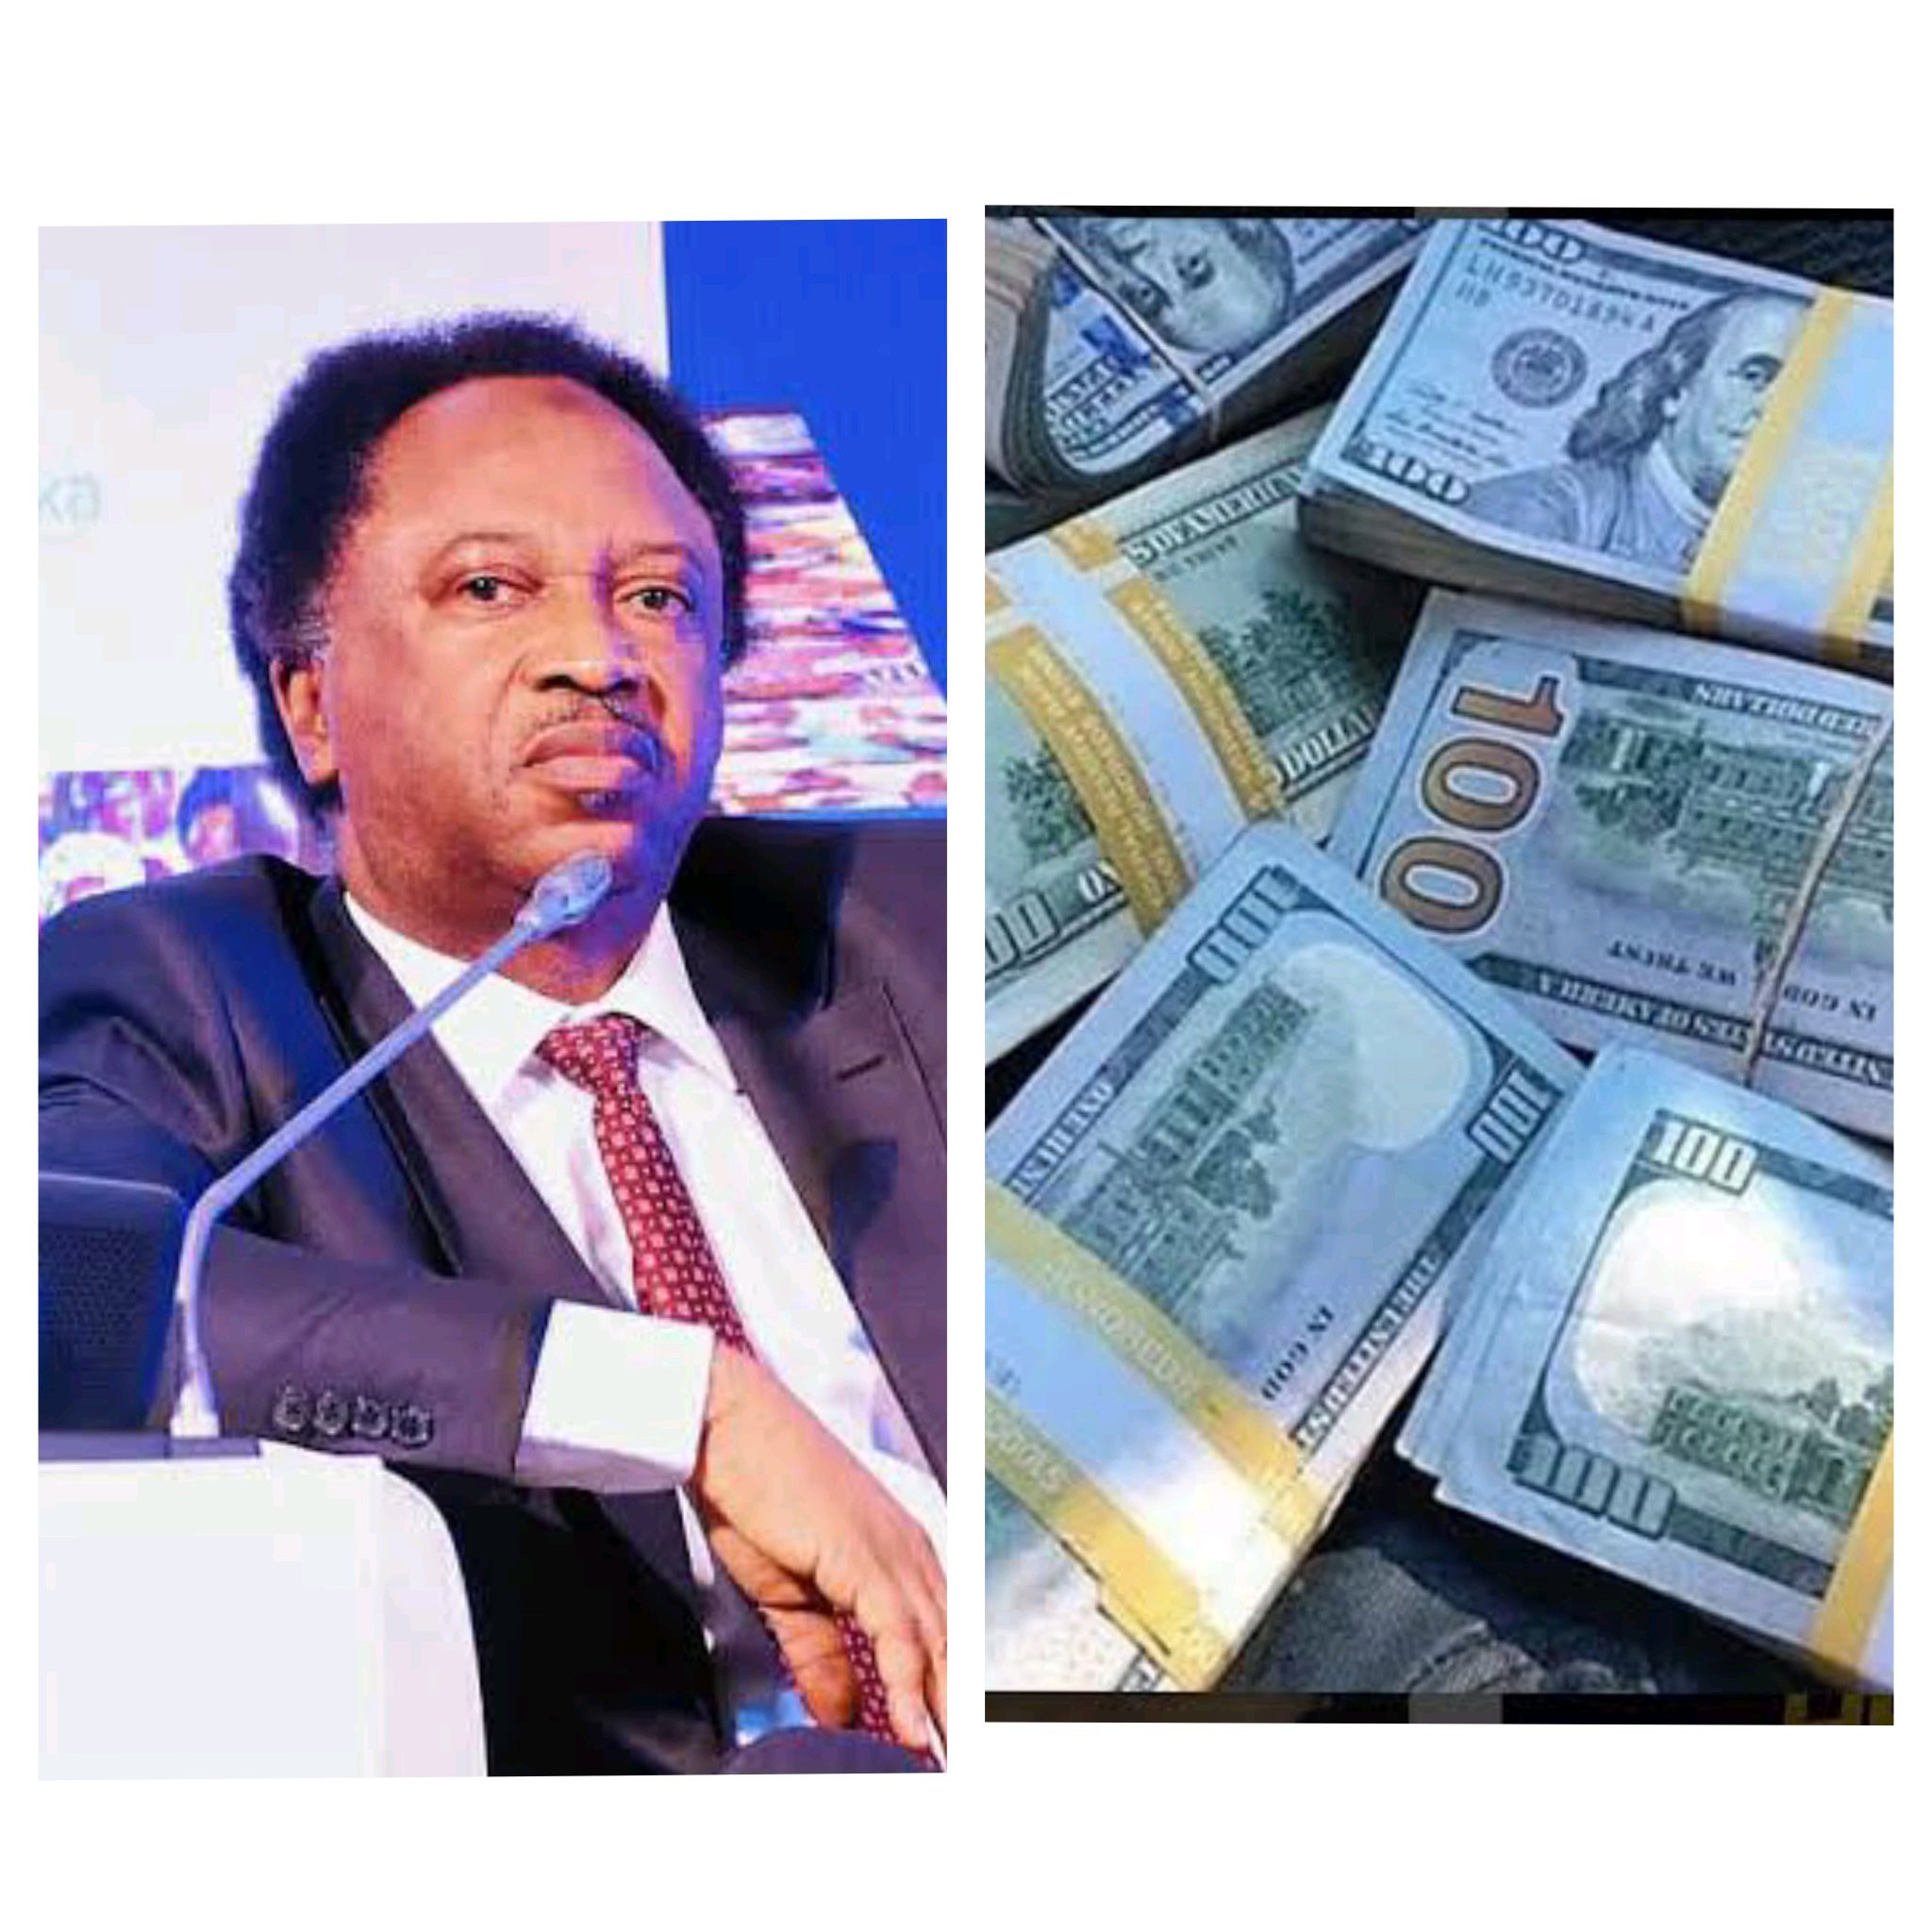 Nigerians React After Shehu Sani Shares Dollar Exchange Rate Of 10 African Countries Currencies